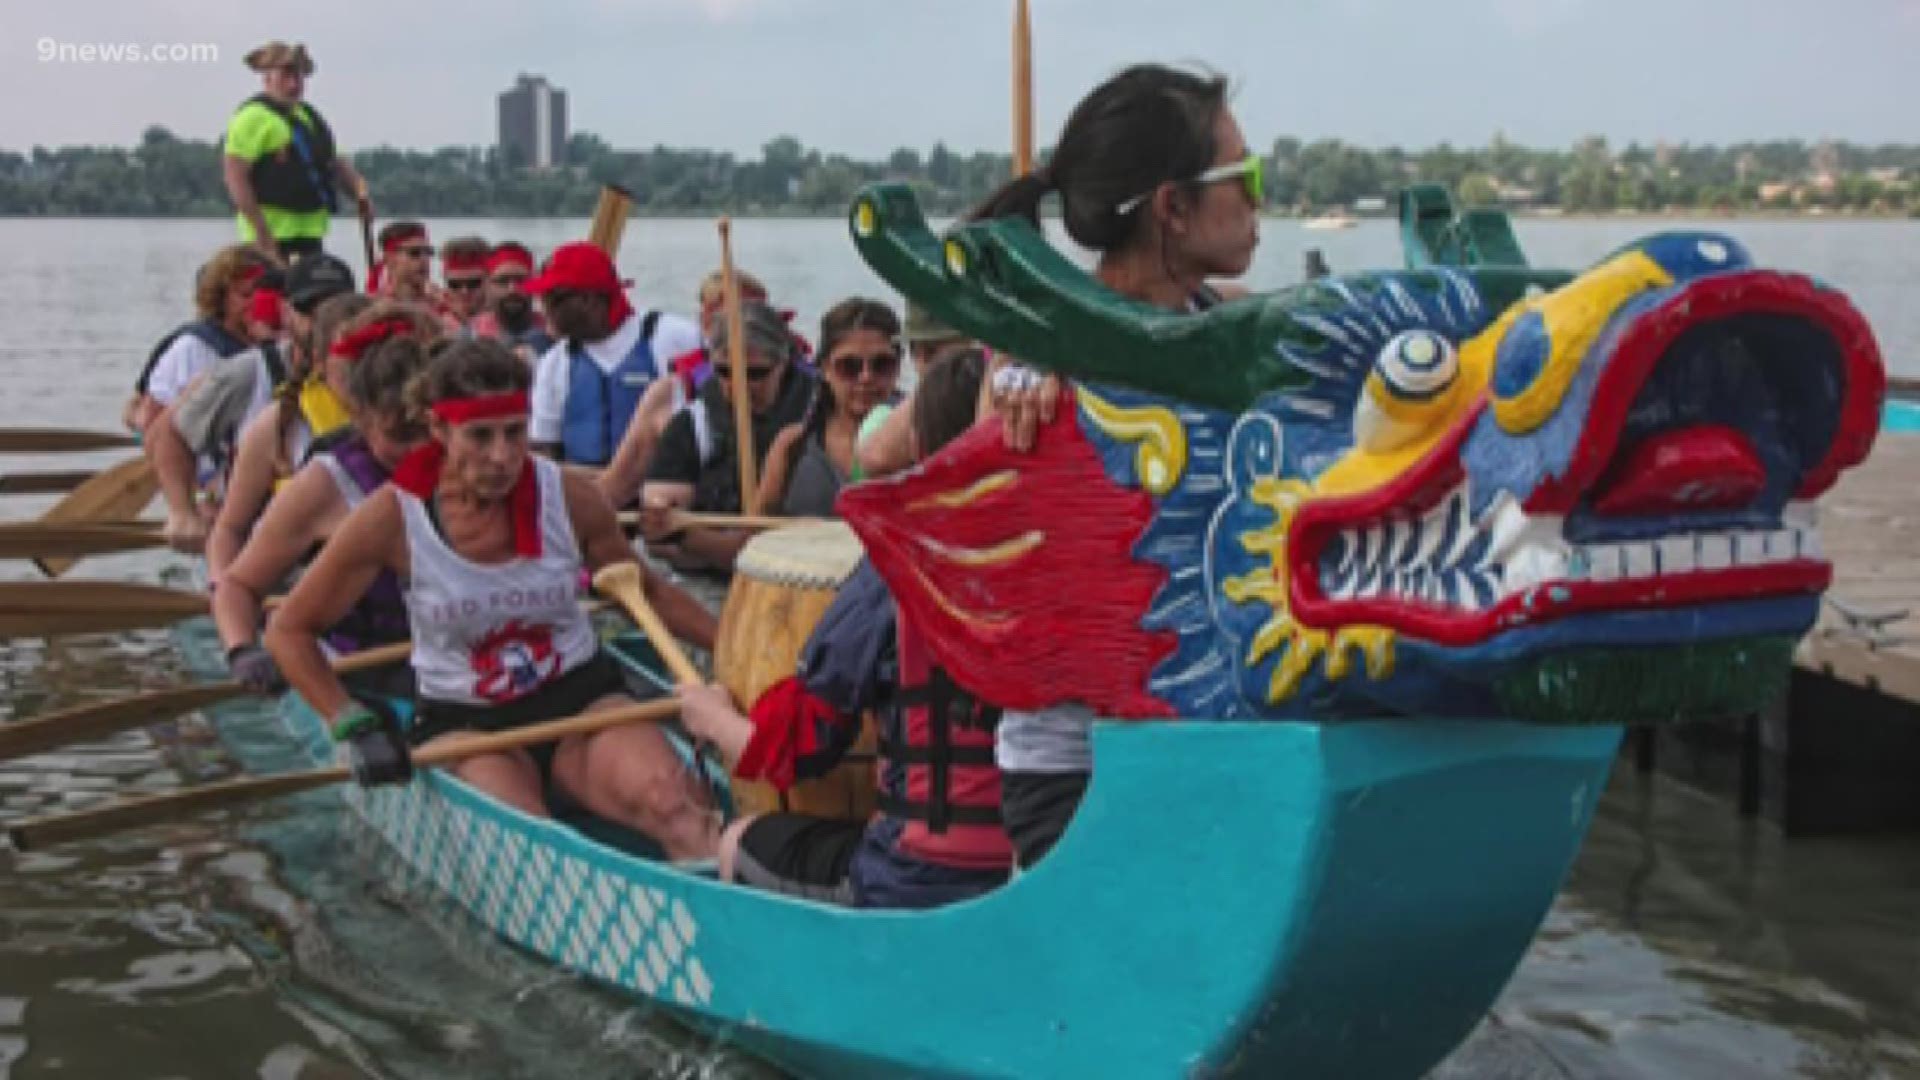 From the Colorado Dragon Boat Festival and numerous county fairs to the Boulder Taco Fest and Buffalo Bill Days, you're bound to have a wonderful July weekend in Denver, Aurora, Golden, Colorado Springs, Cheyenne and more.